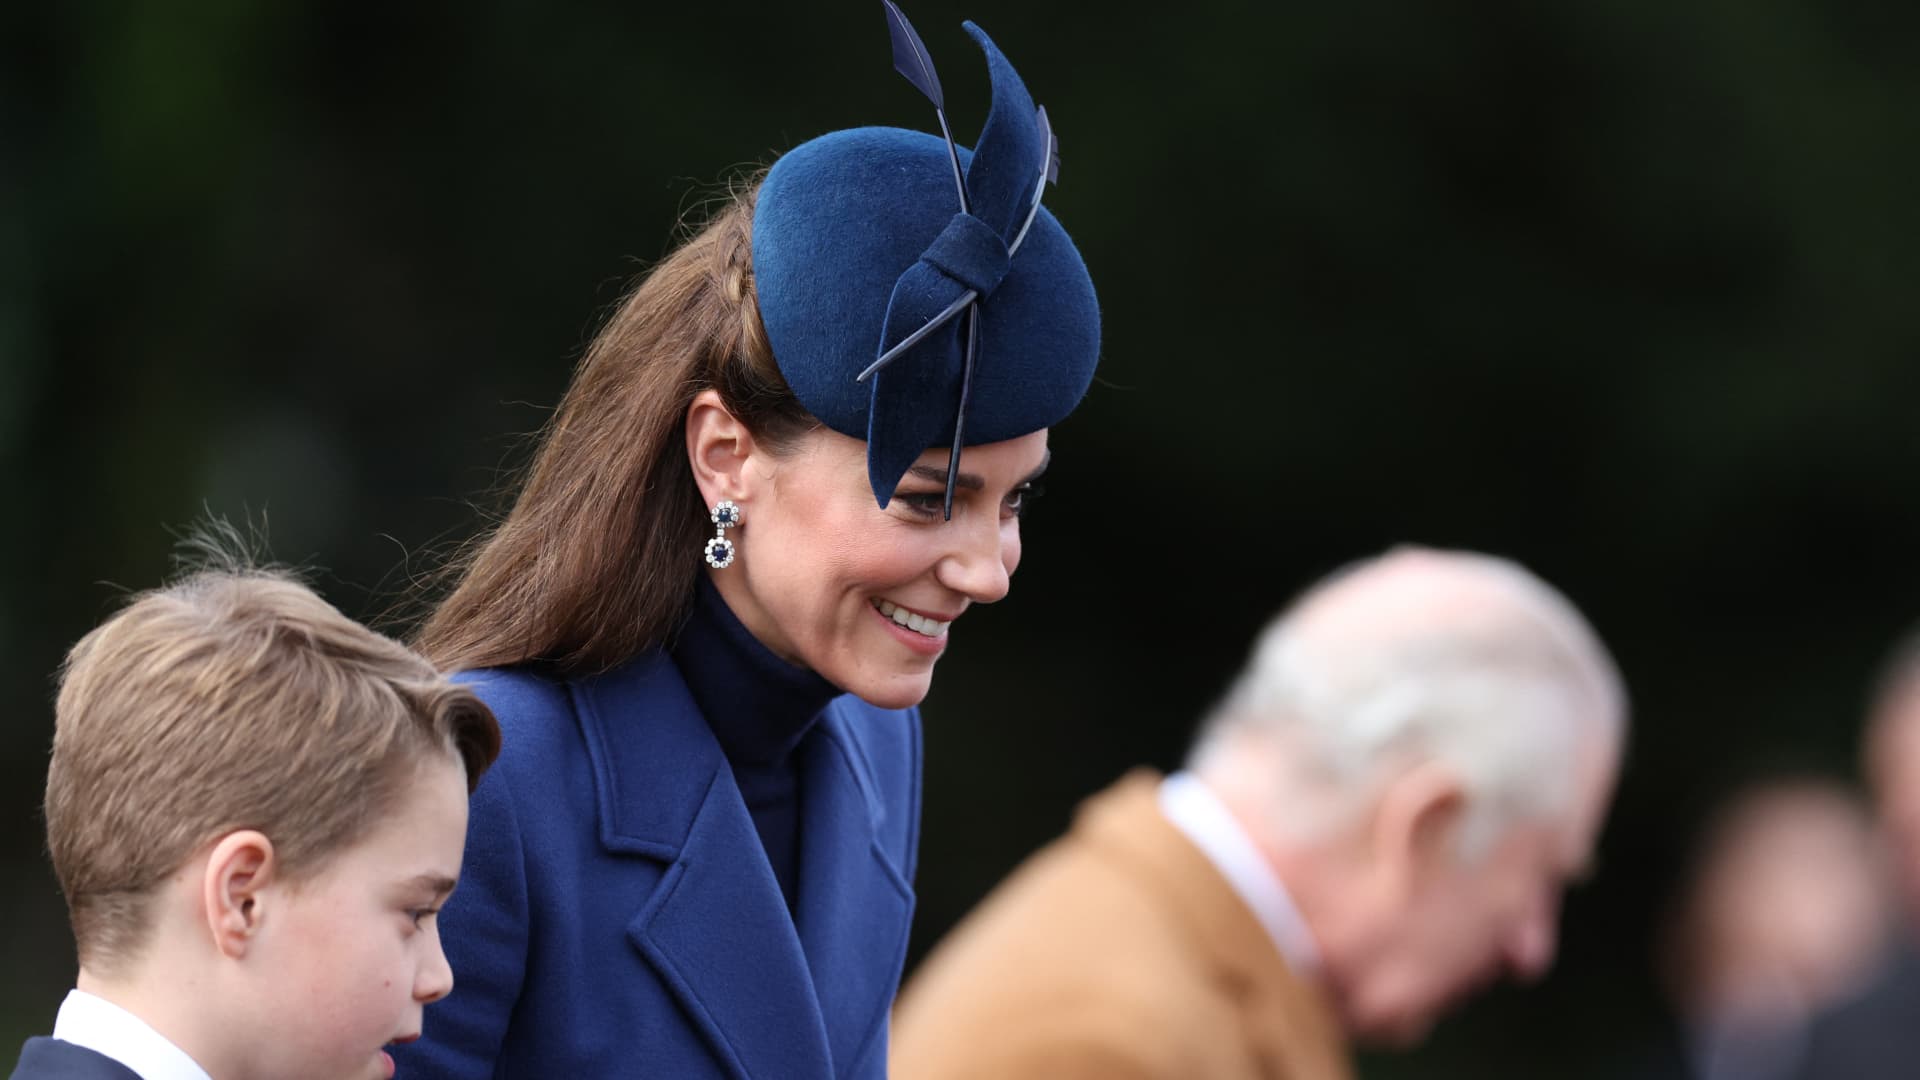 Princess Kate reveals she is in the early stages of treatment for cancer